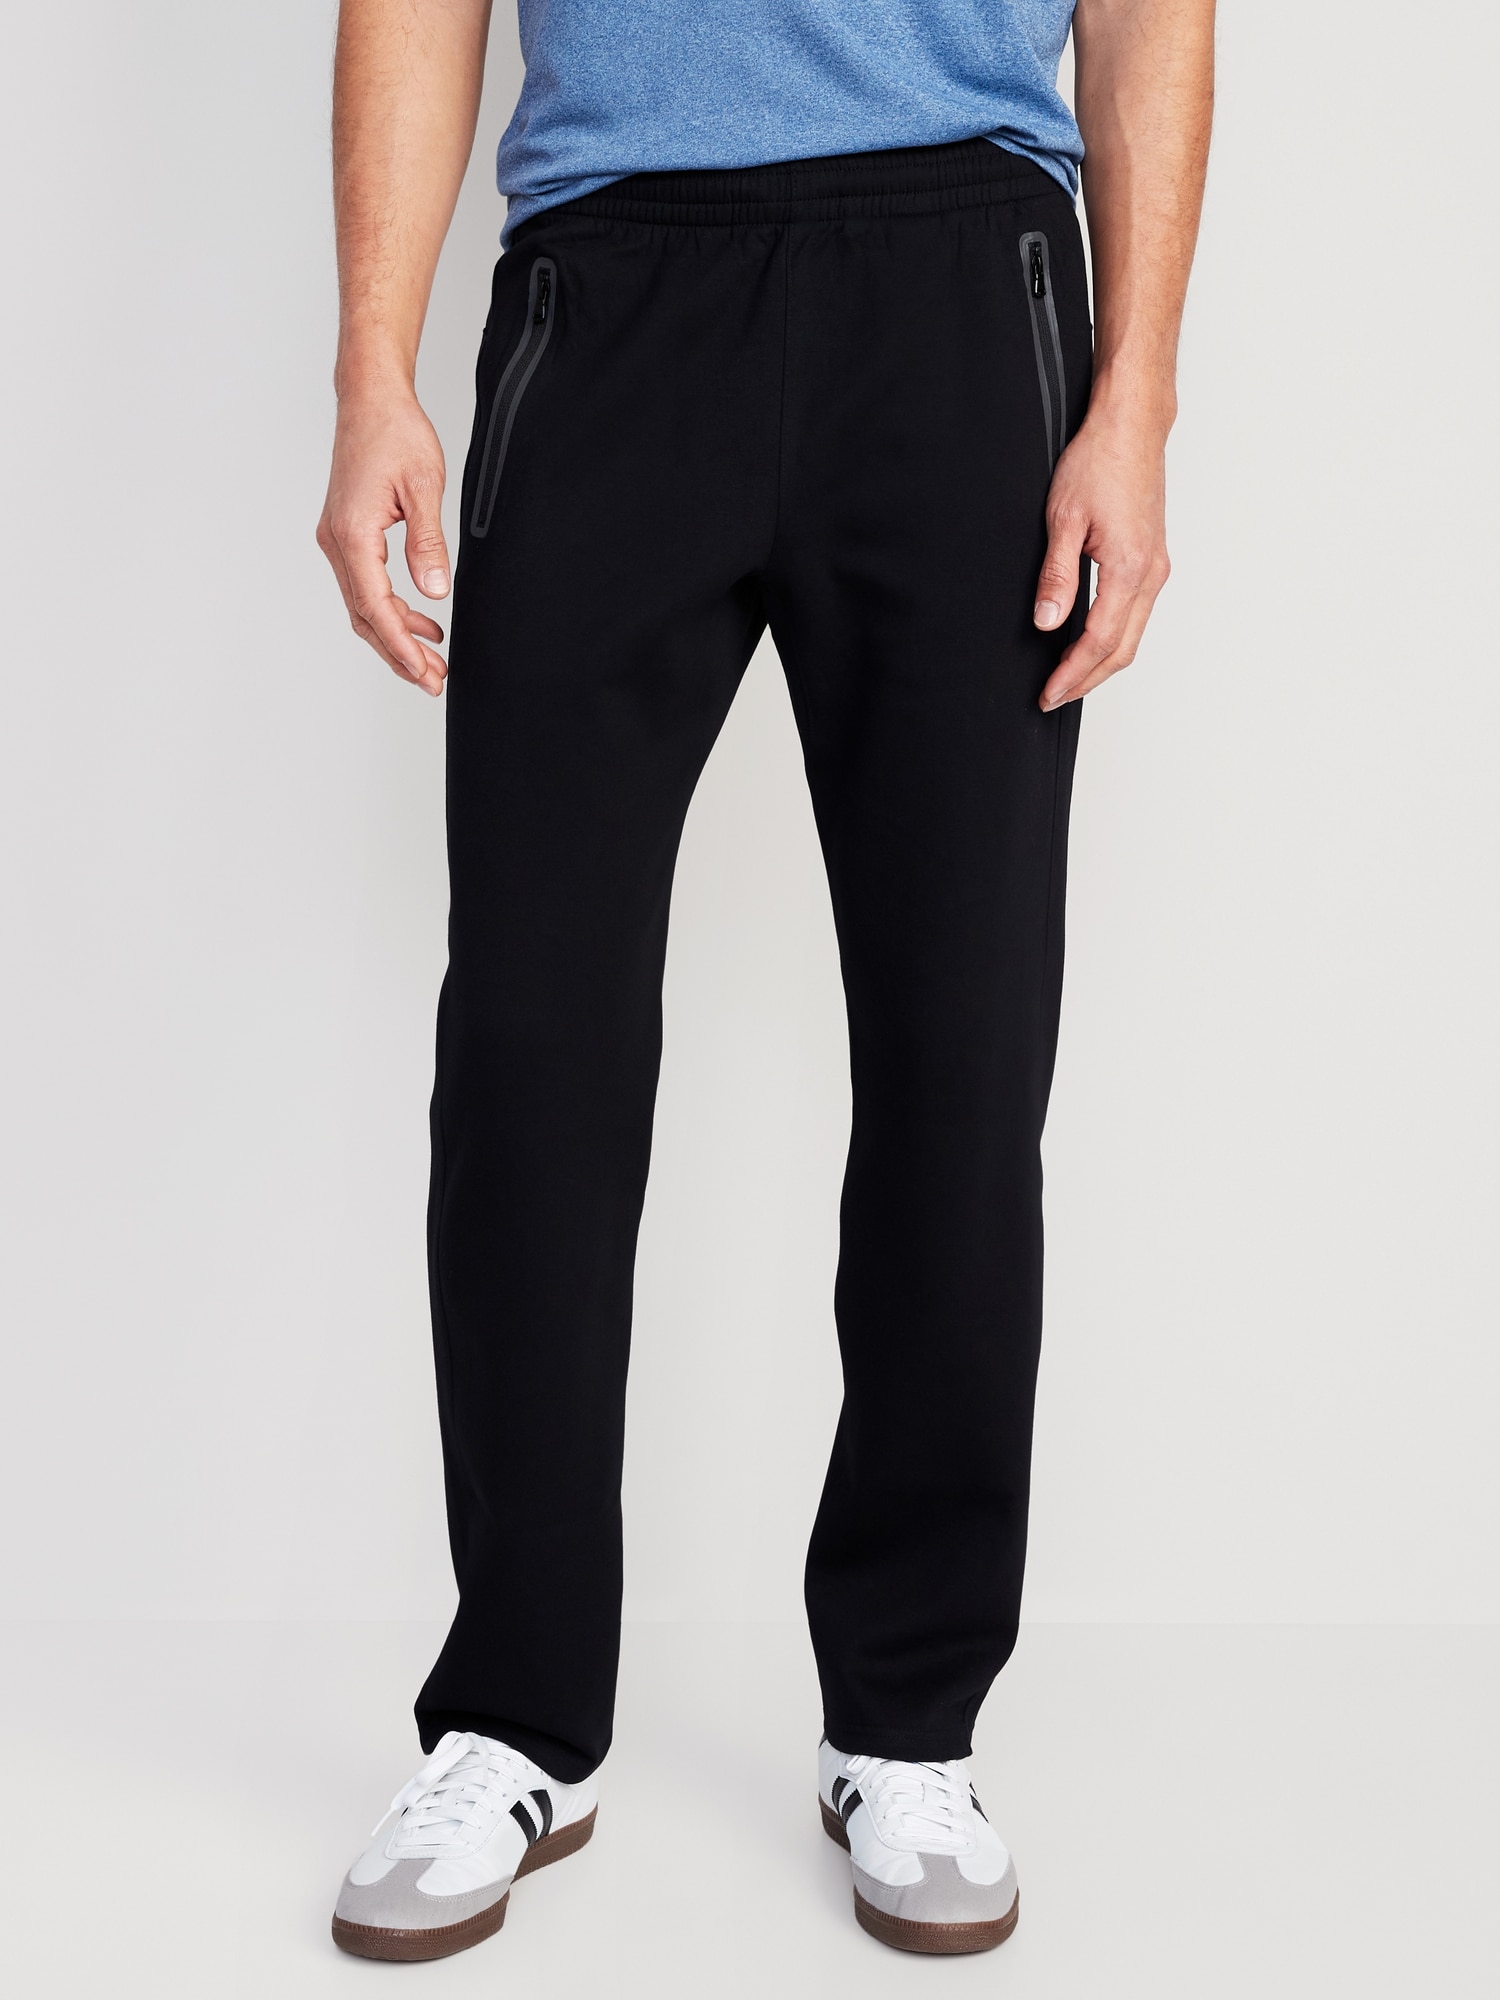 Straight Men's Sweatpants Flated Young La Jogger New Items In